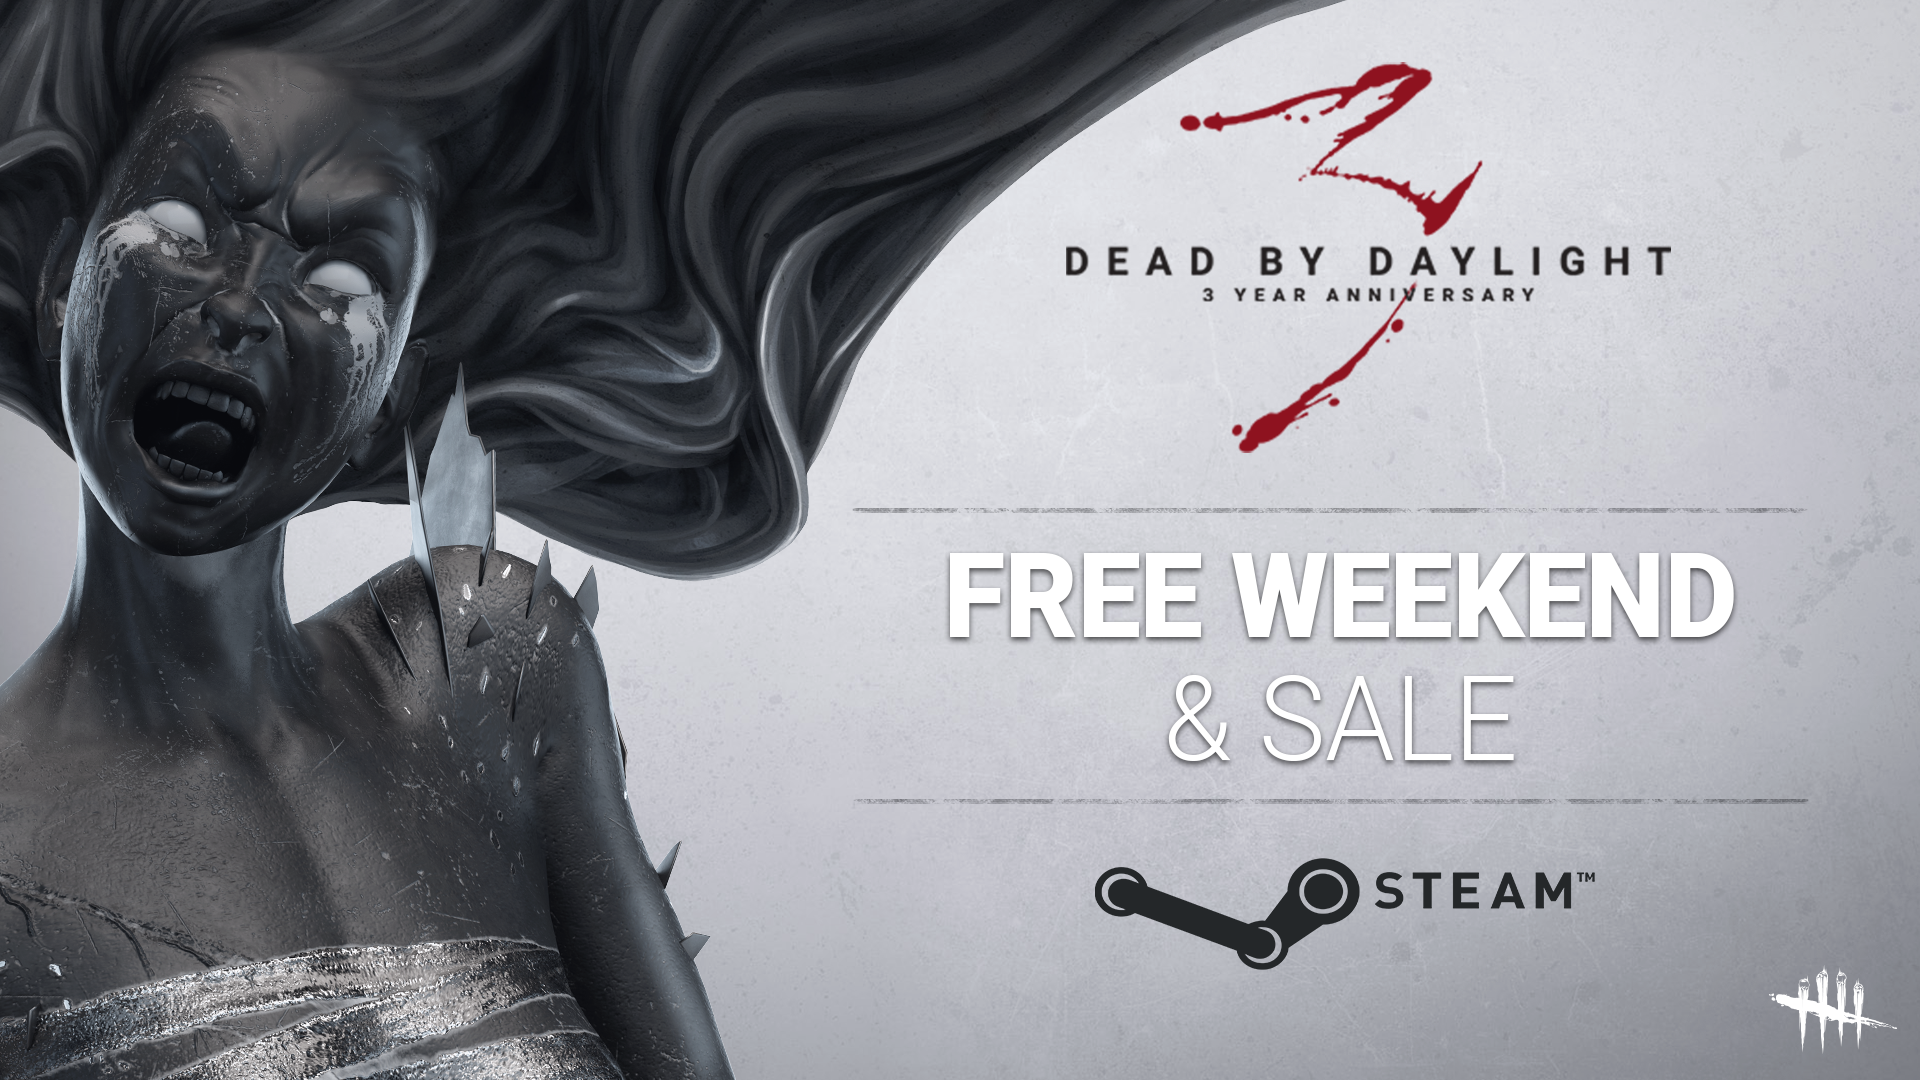 Dead by Daylight :: Dead by Daylight is playable for free until.